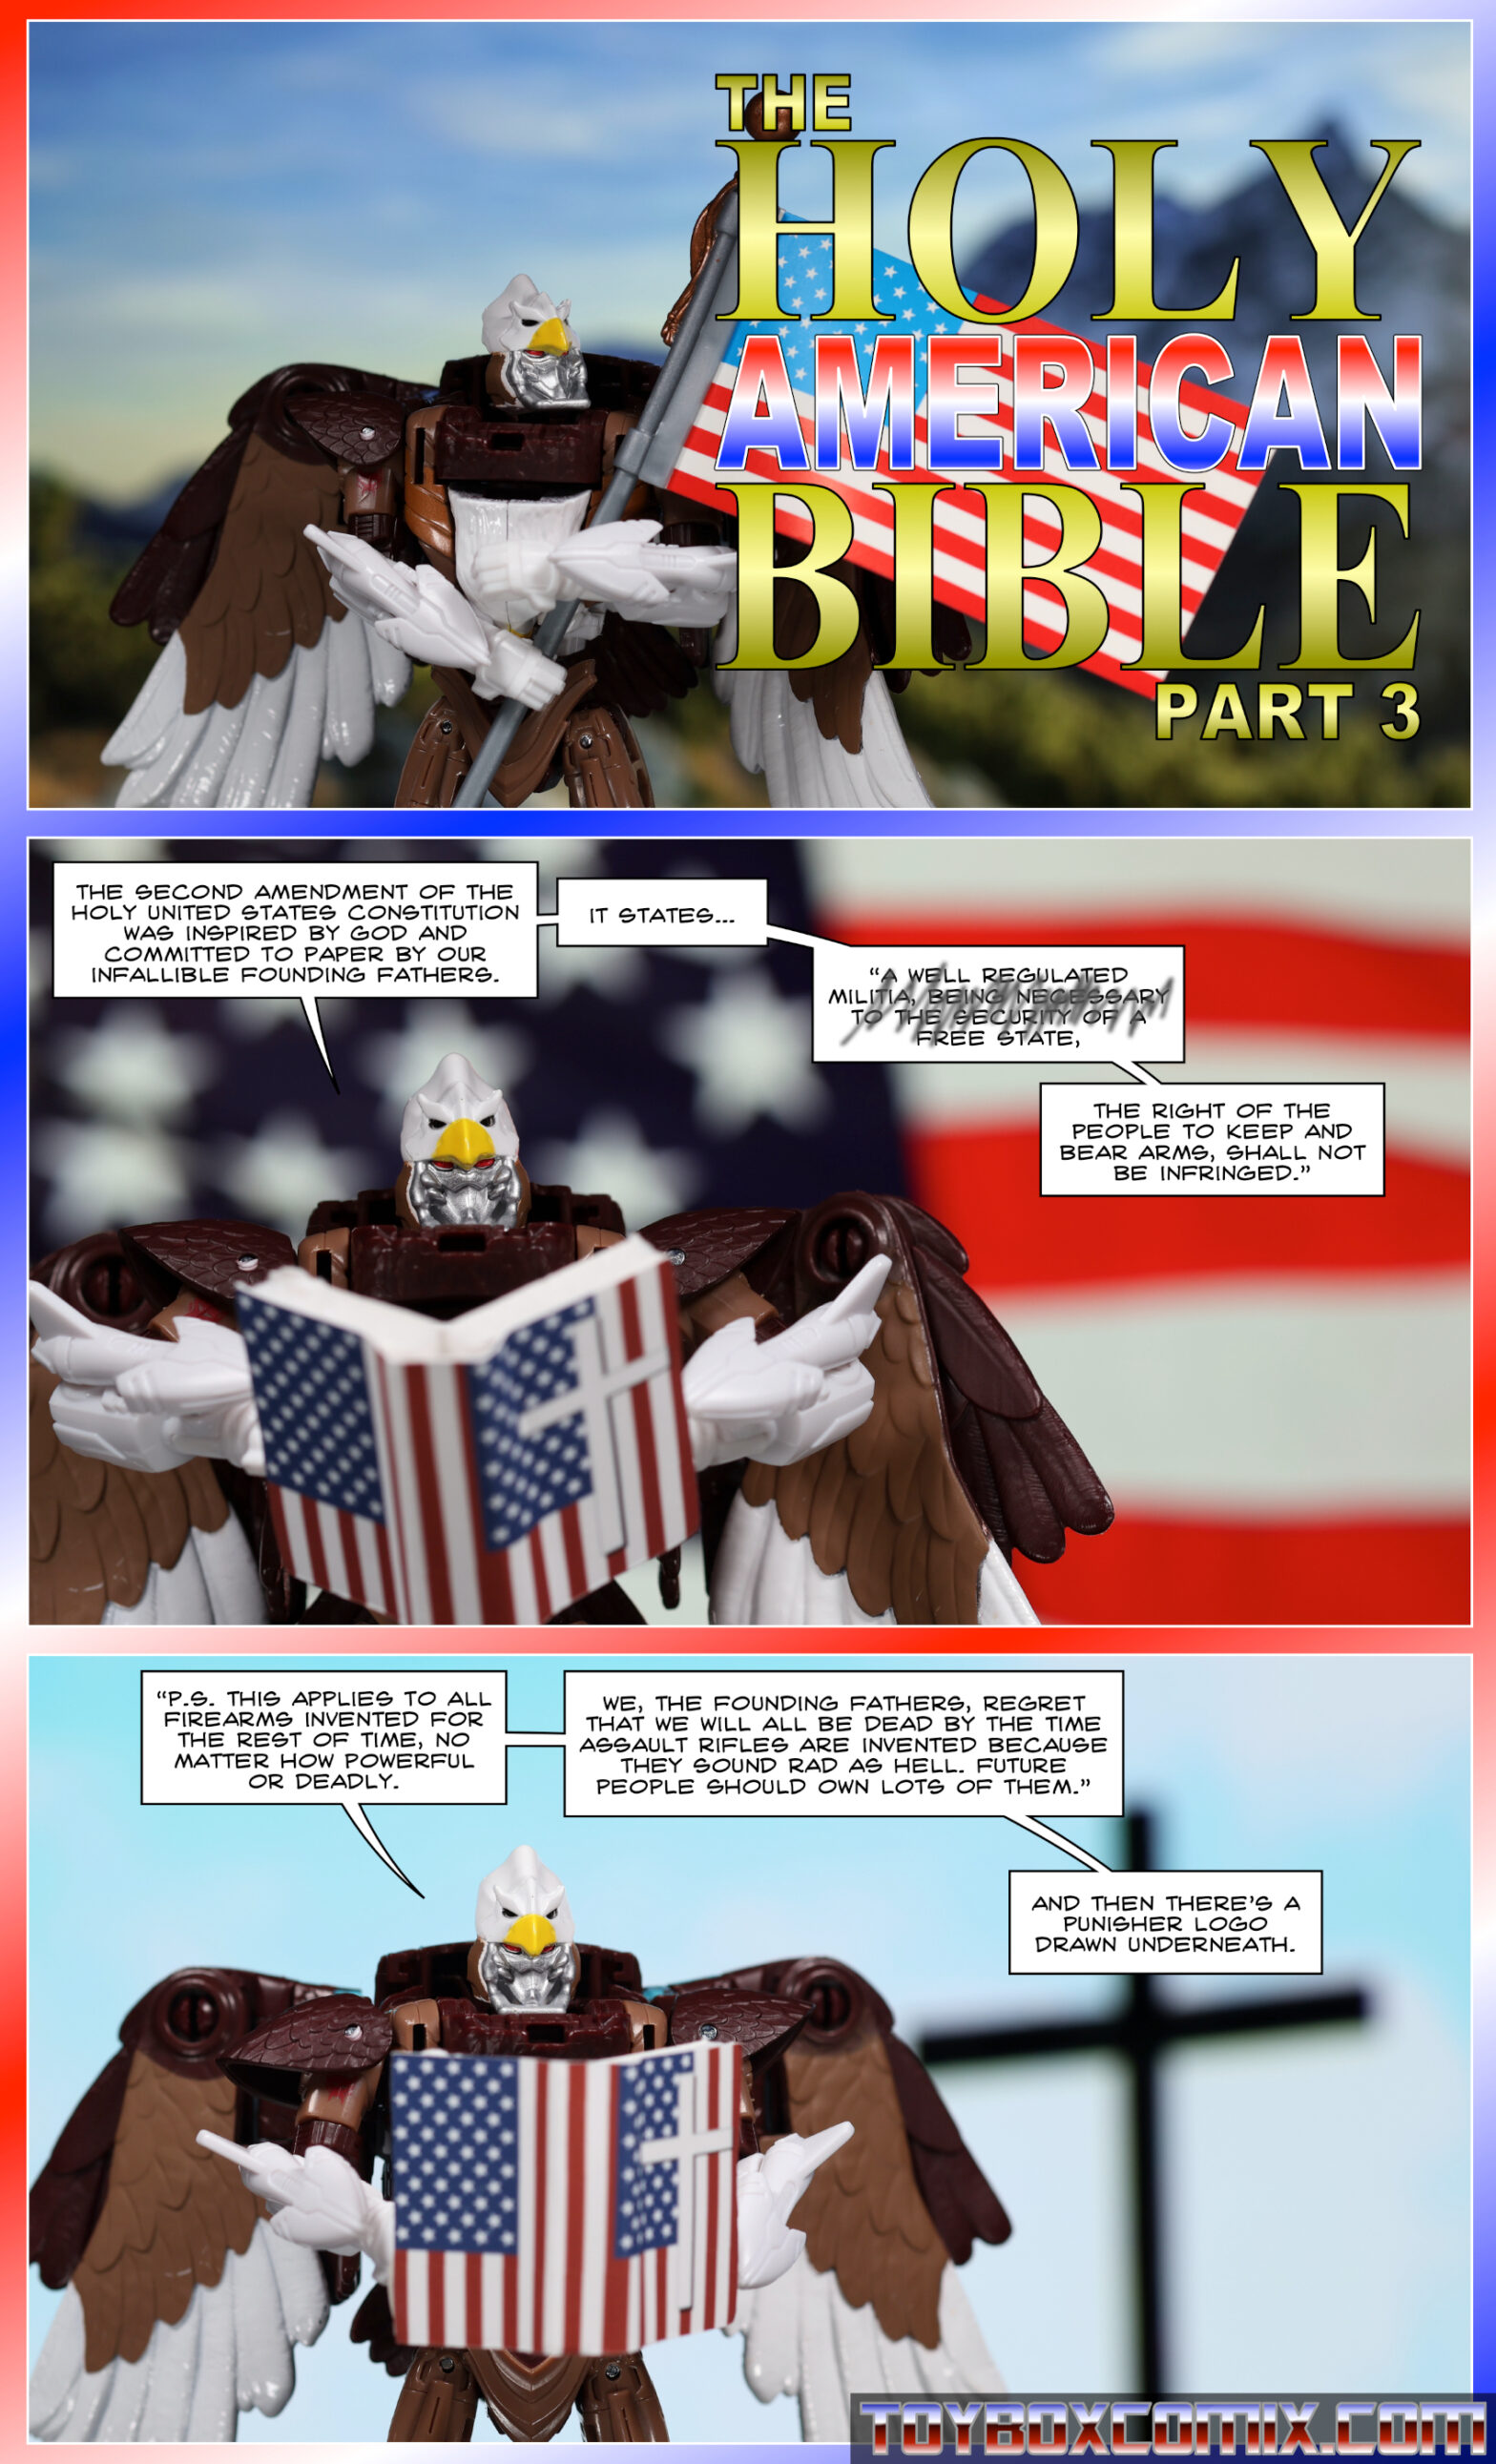 Panel 1: Maximal Skywarp hugs an American flag. Dramatic text: “The Holy American Bible Part 3” 2: Skywarp, holding a book with American flags and a cross on the cover: “The second amendment of the holy United States Constitution was inspired by God and committed to paper by our infallible founding fathers. It states…” Scribbled-out text: “’A well-regulated militia, being necessary to the security of a free state,” non-scribbled-out text: “the right of the people to keep and bear arms, shall not be infringed.’” 3: Skywarp, reading from the book: “’P.S. this applies to all firearms invented for the rest of time, no matter how powerful or deadly. We, the founding fathers, regret that we will all be dead by the time assault rifles are invented because they sound rad as hell. Future people should own lots of them.’ And then there’s a Punisher logo drawn underneath.”